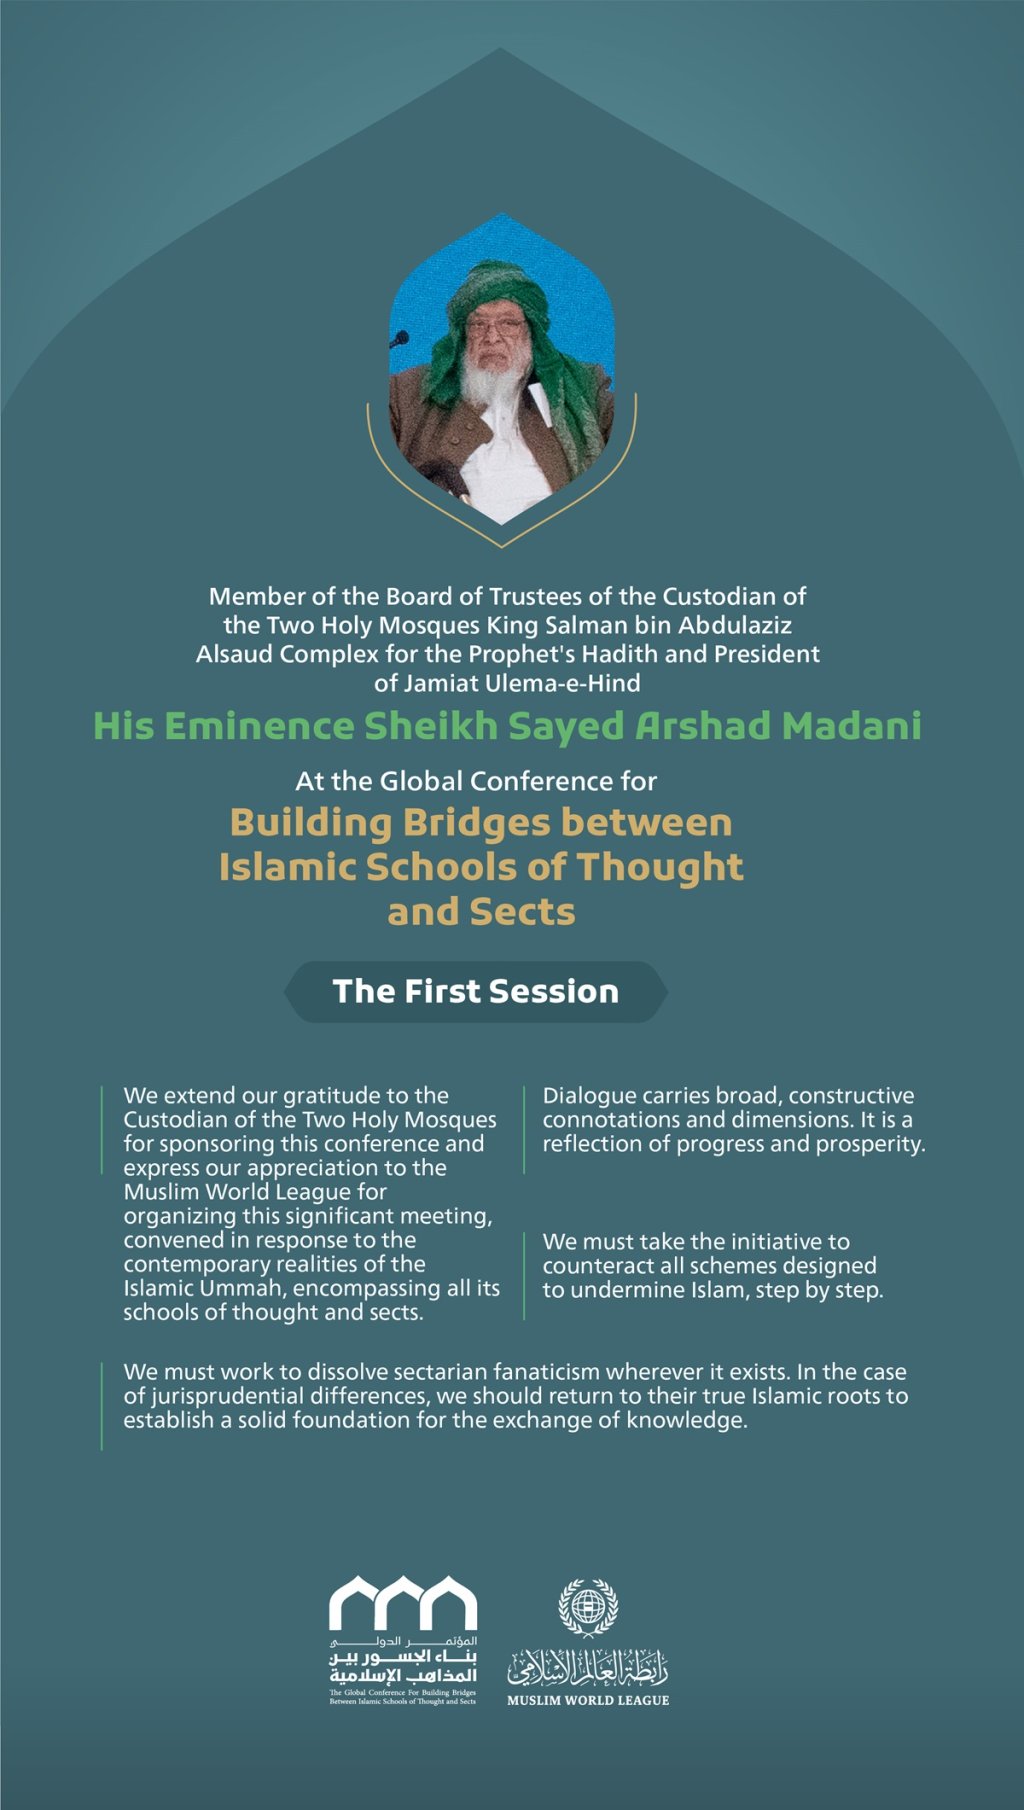 Remarks by His Eminence Sheikh Sayed Arshad ‎Madani, President of Jamiat Ulema-e-Hind, at the Global Conference for Building Bridges between Islamic Schools of Thought and Sects: